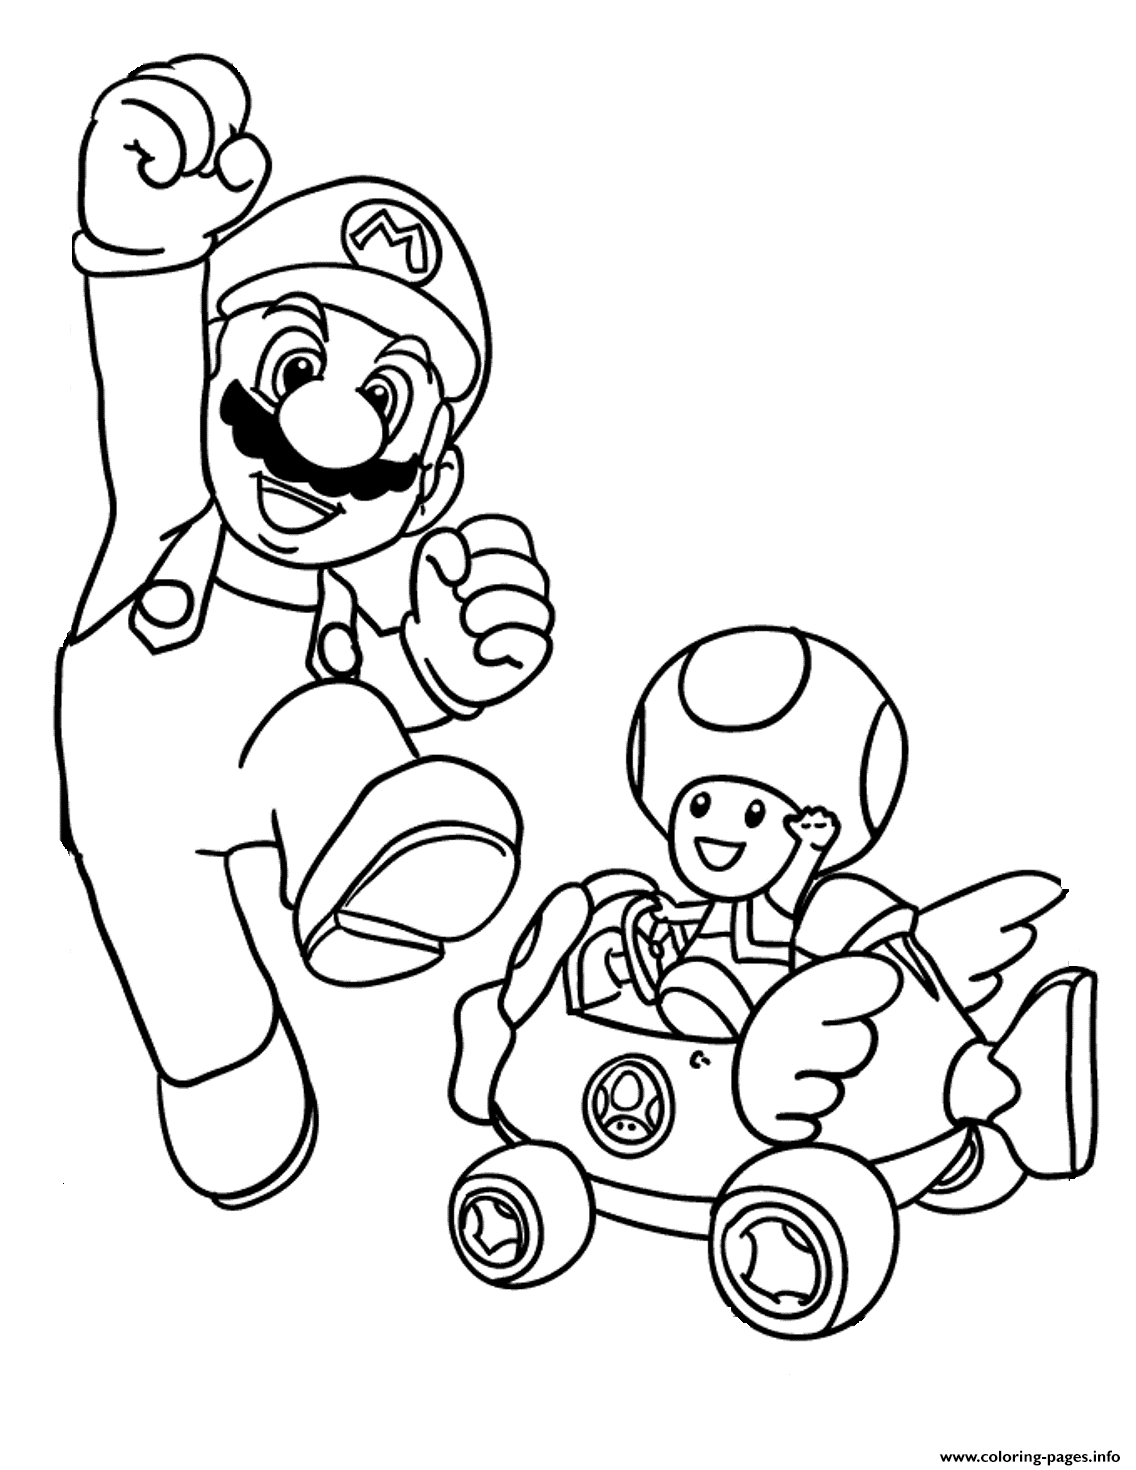 Mushroom And Mario Bros S3679 coloring pages